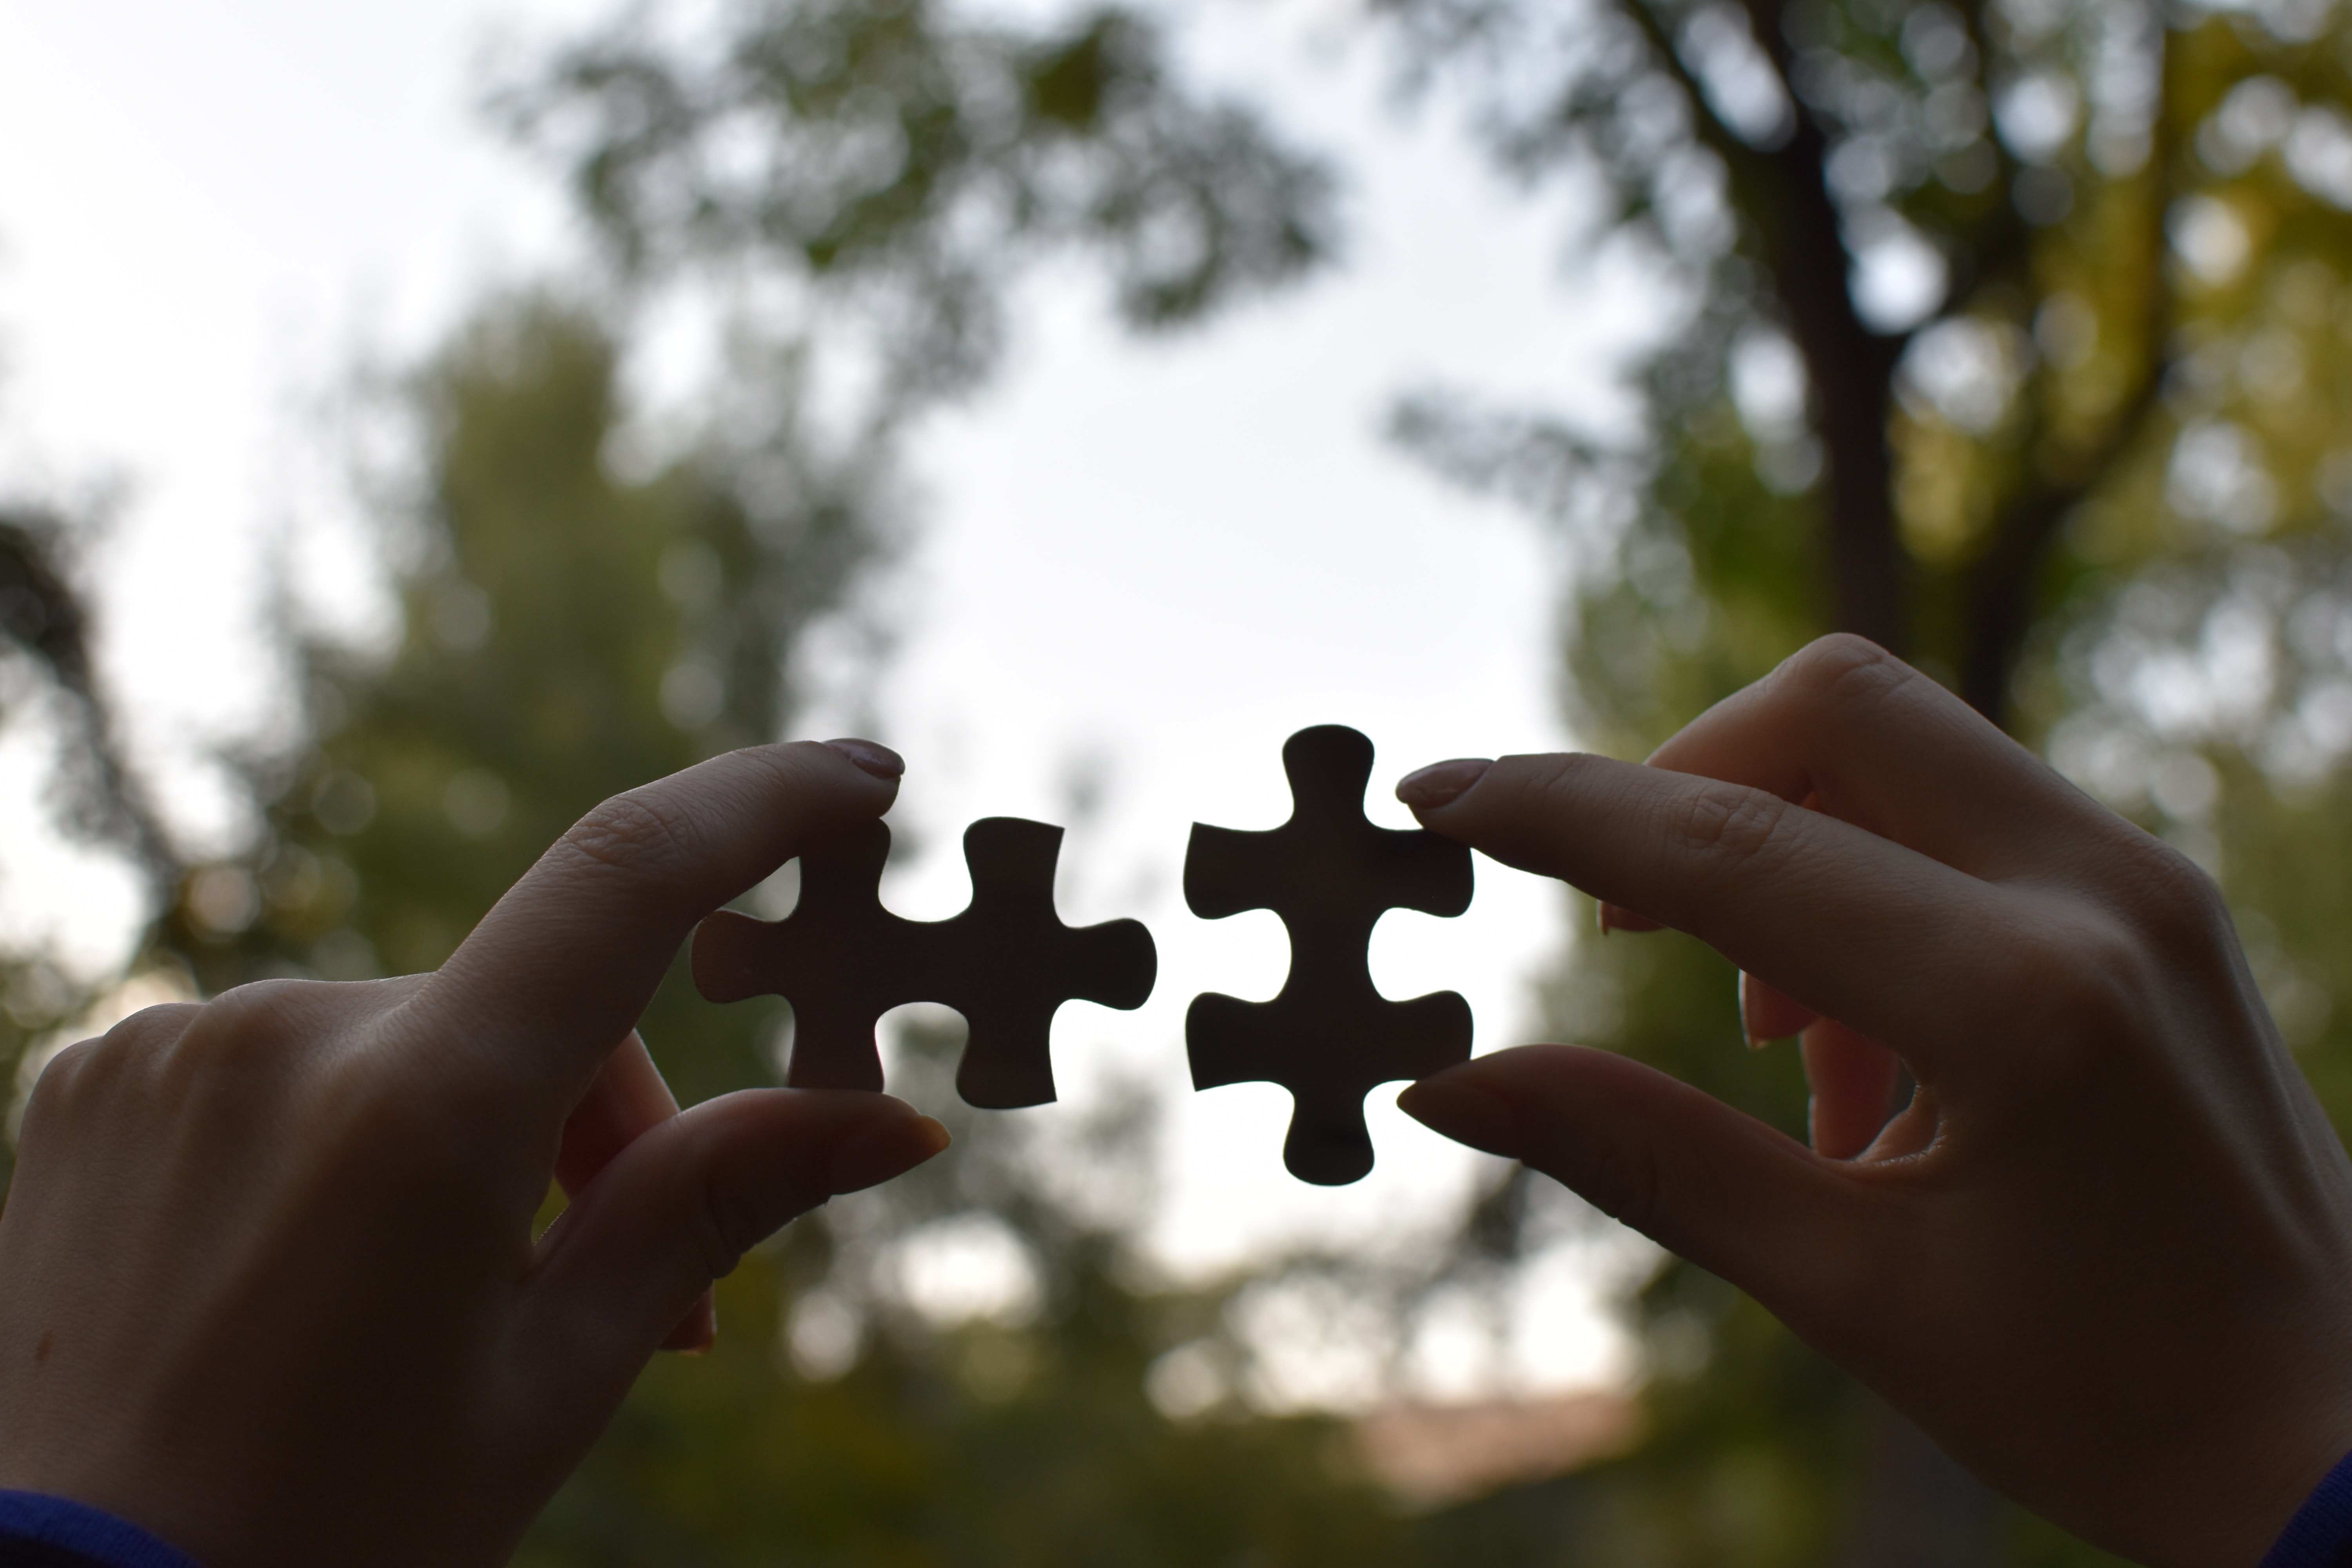 Hands holding up two jigsaw pieces to the light. Trees can be seen, blurred, in the background.Hands holding up two jigsaw pieces to the light. Trees can be seen, blurred, in the background.Hands holding up two jigsaw pieces to the light. Trees can be seen, blurred, in the background.